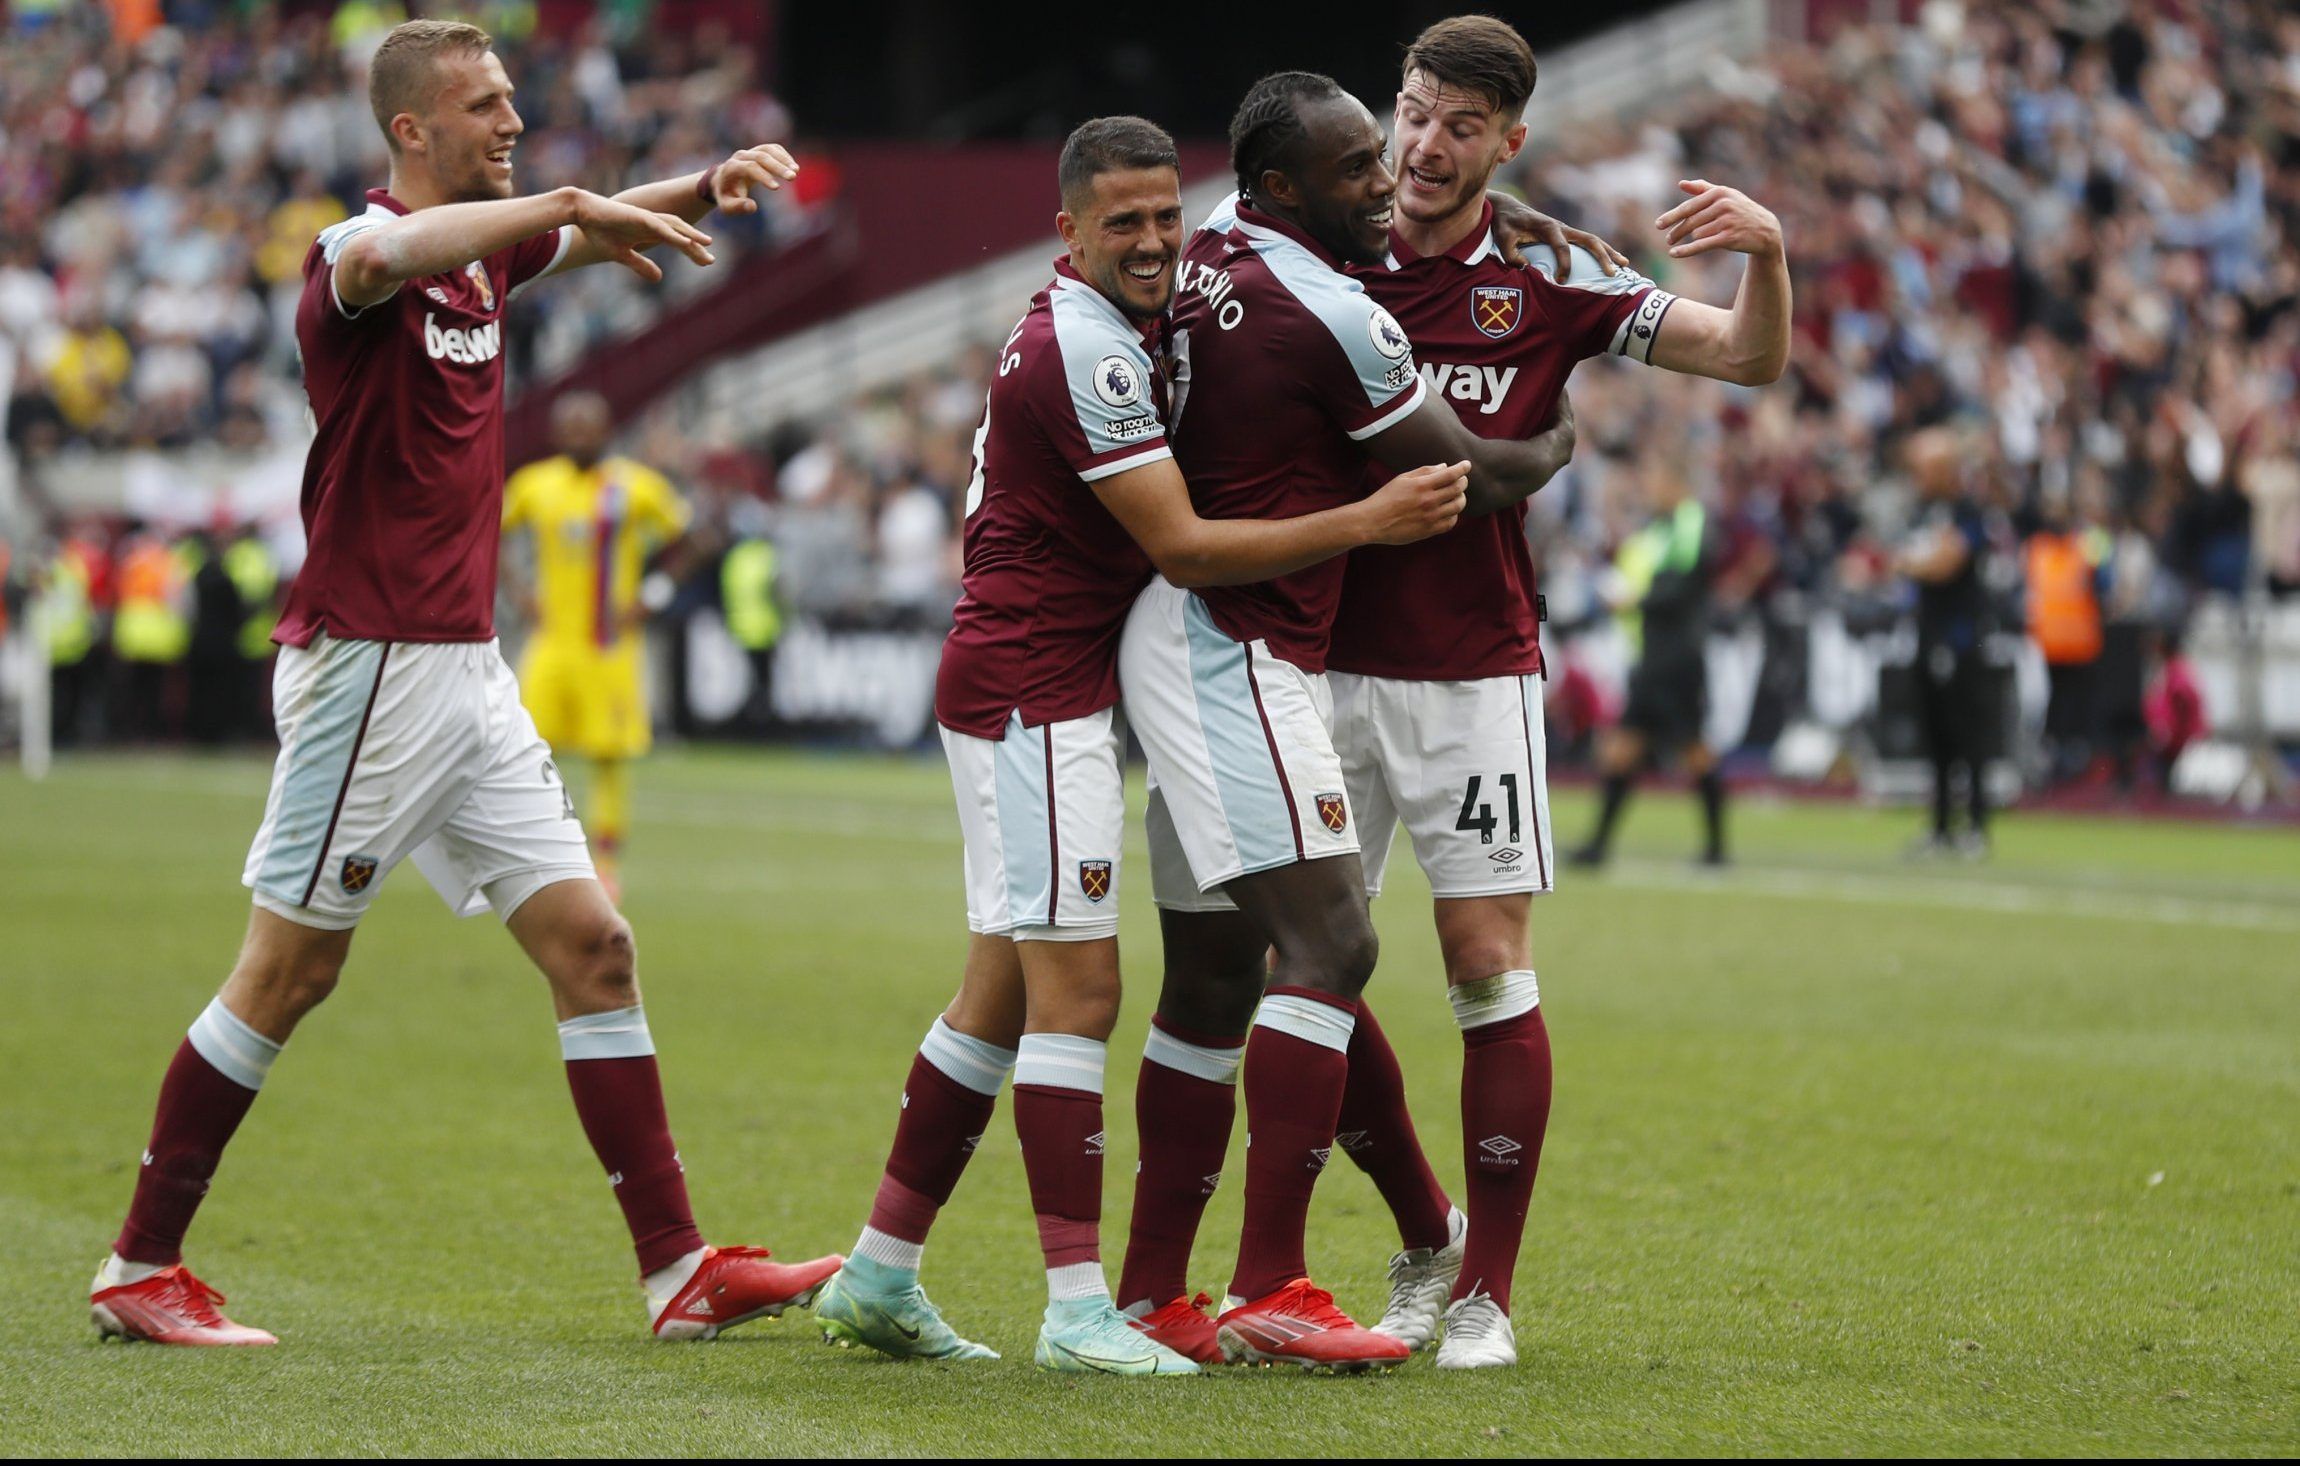 West Ham players celebrate Michail Antonio's goal against Crystal Palace in the Premier League